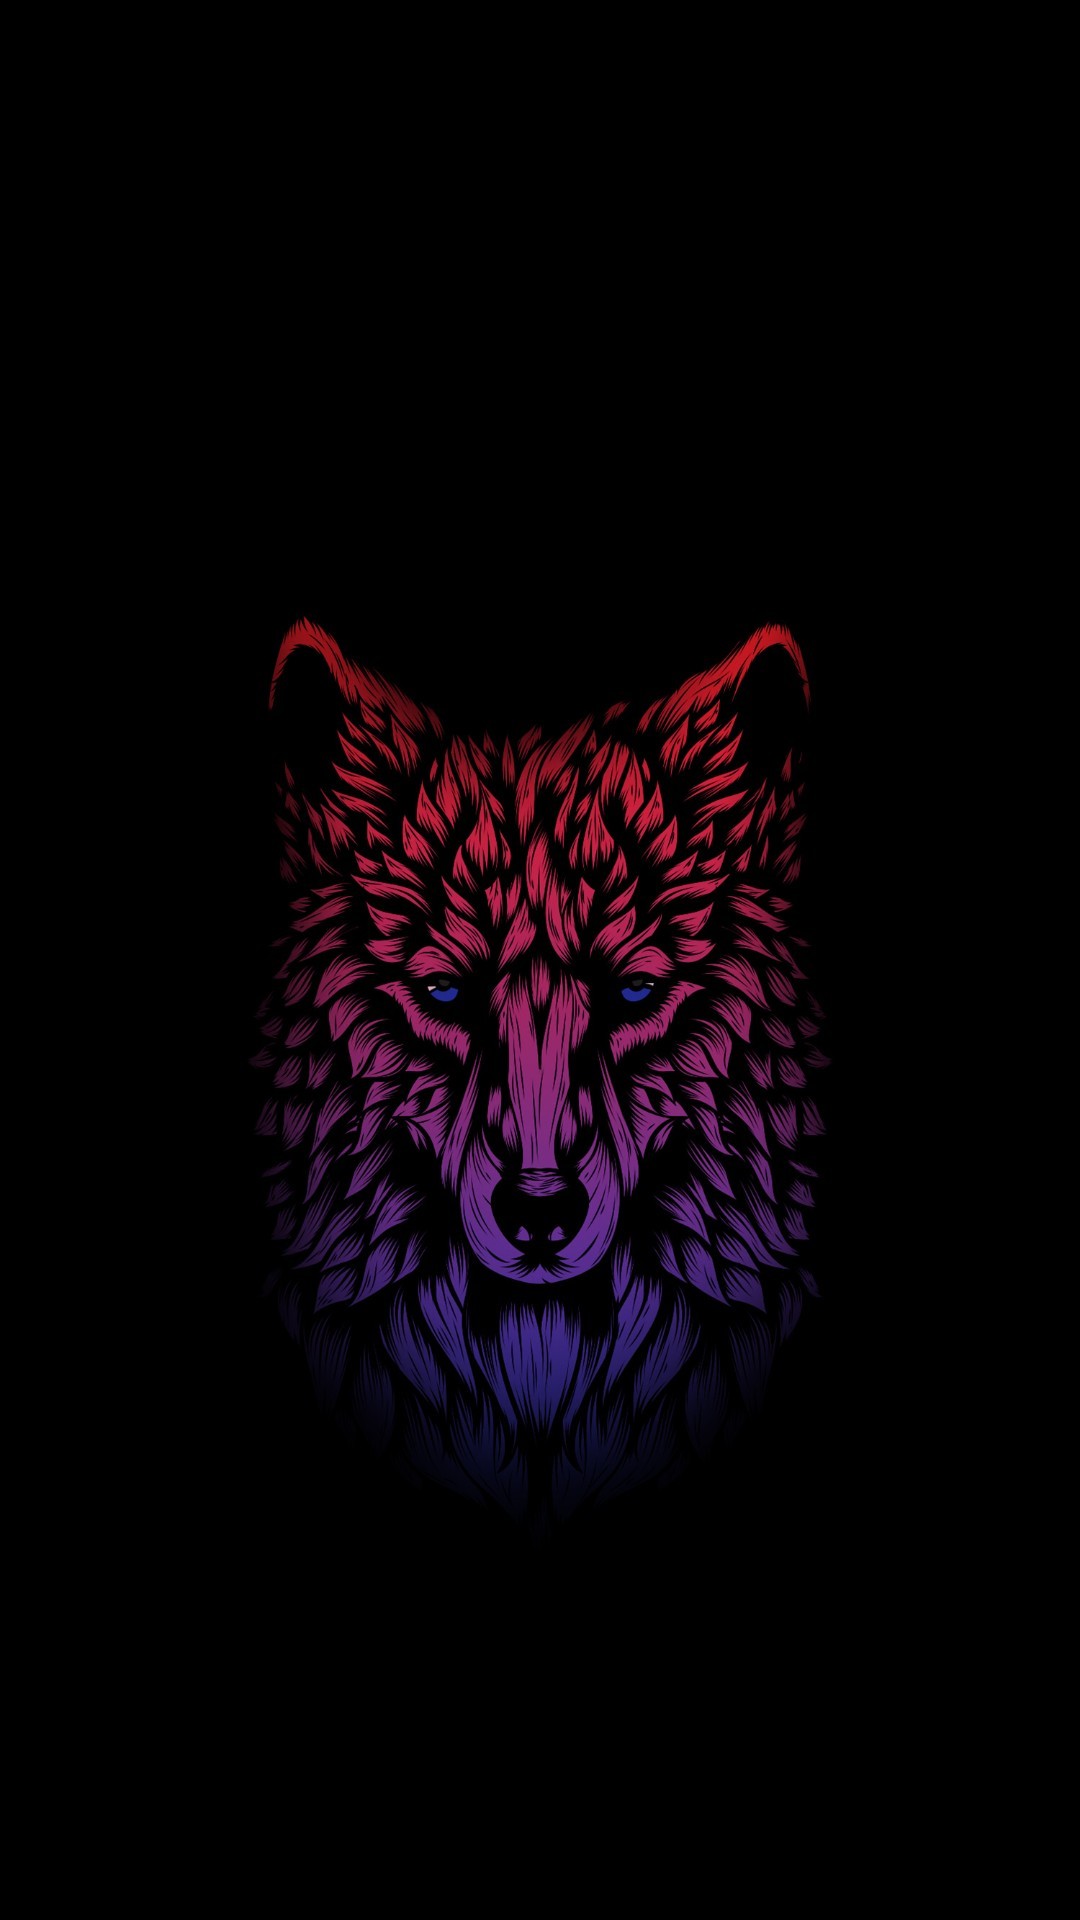 Amoled Wallpapers 81+ images